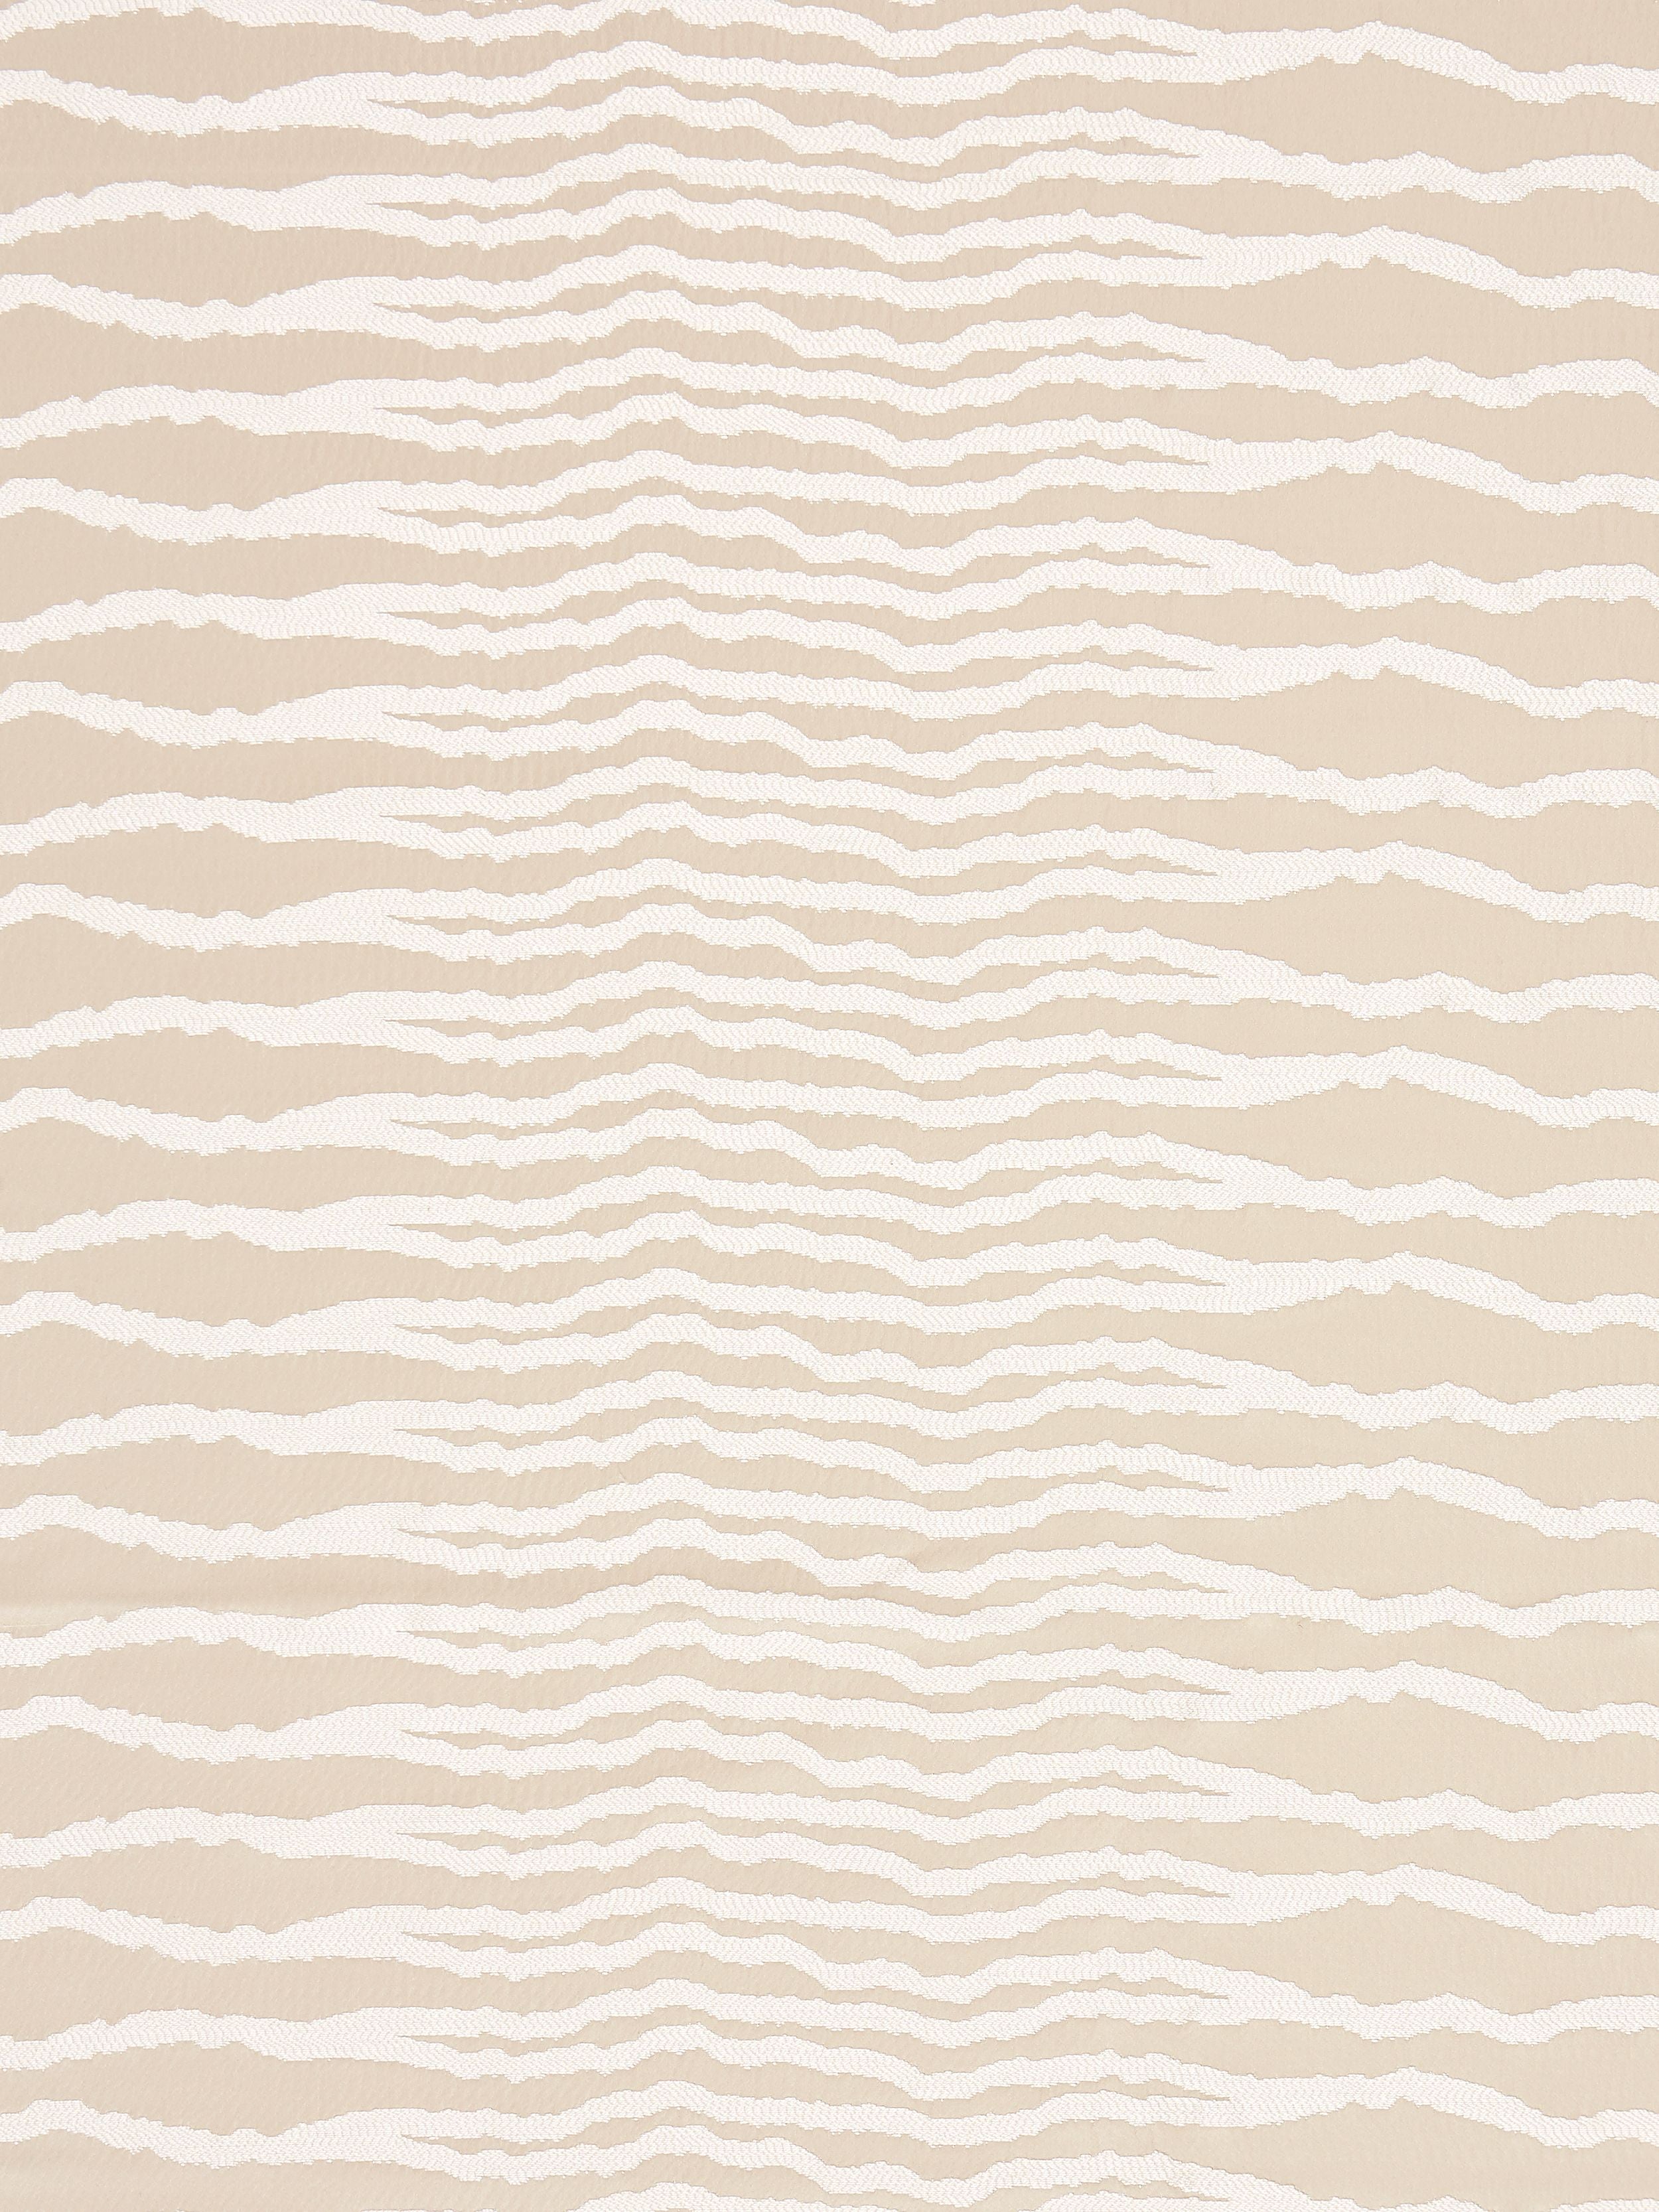 Desert Mirage fabric in platinum color - pattern number SC 000127028 - by Scalamandre in the Scalamandre Fabrics Book 1 collection